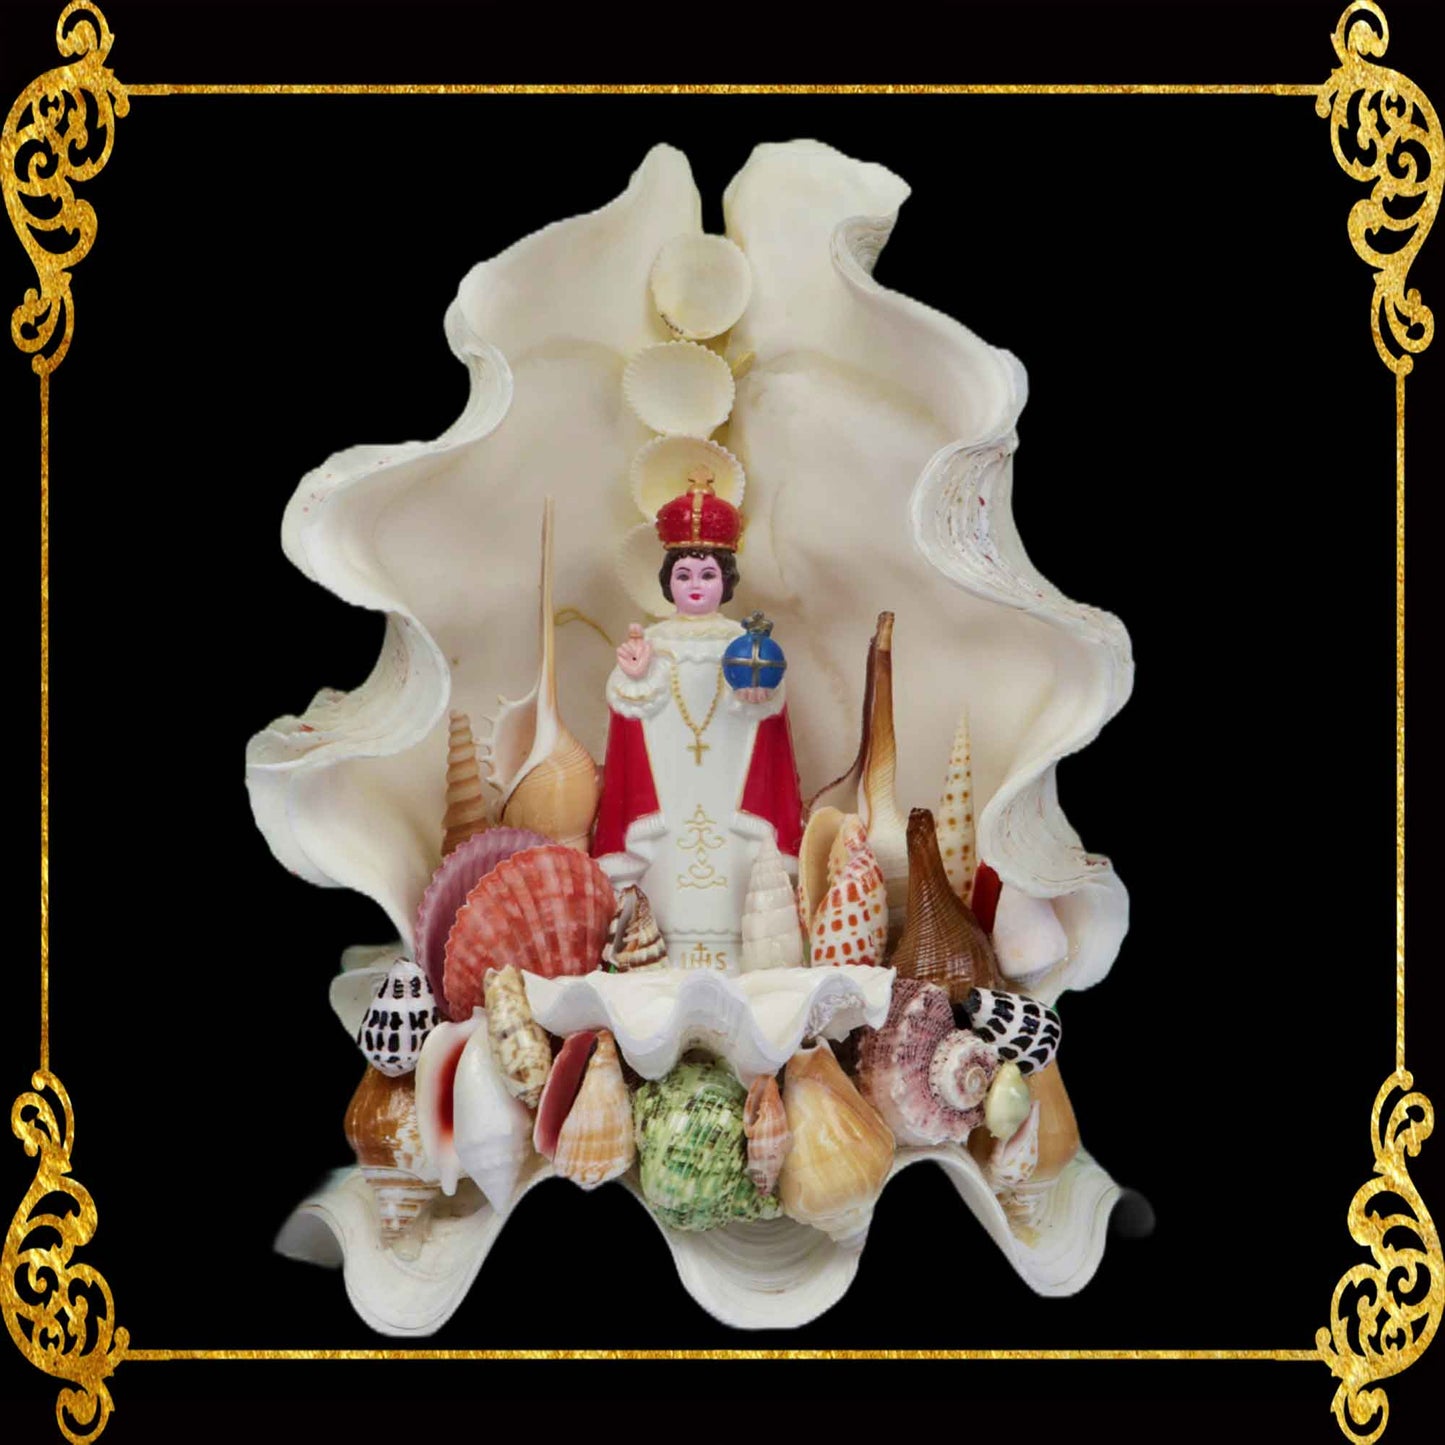 Lamp | Christian Decor | Sto. Nino in Clams Shell | 10 Inches